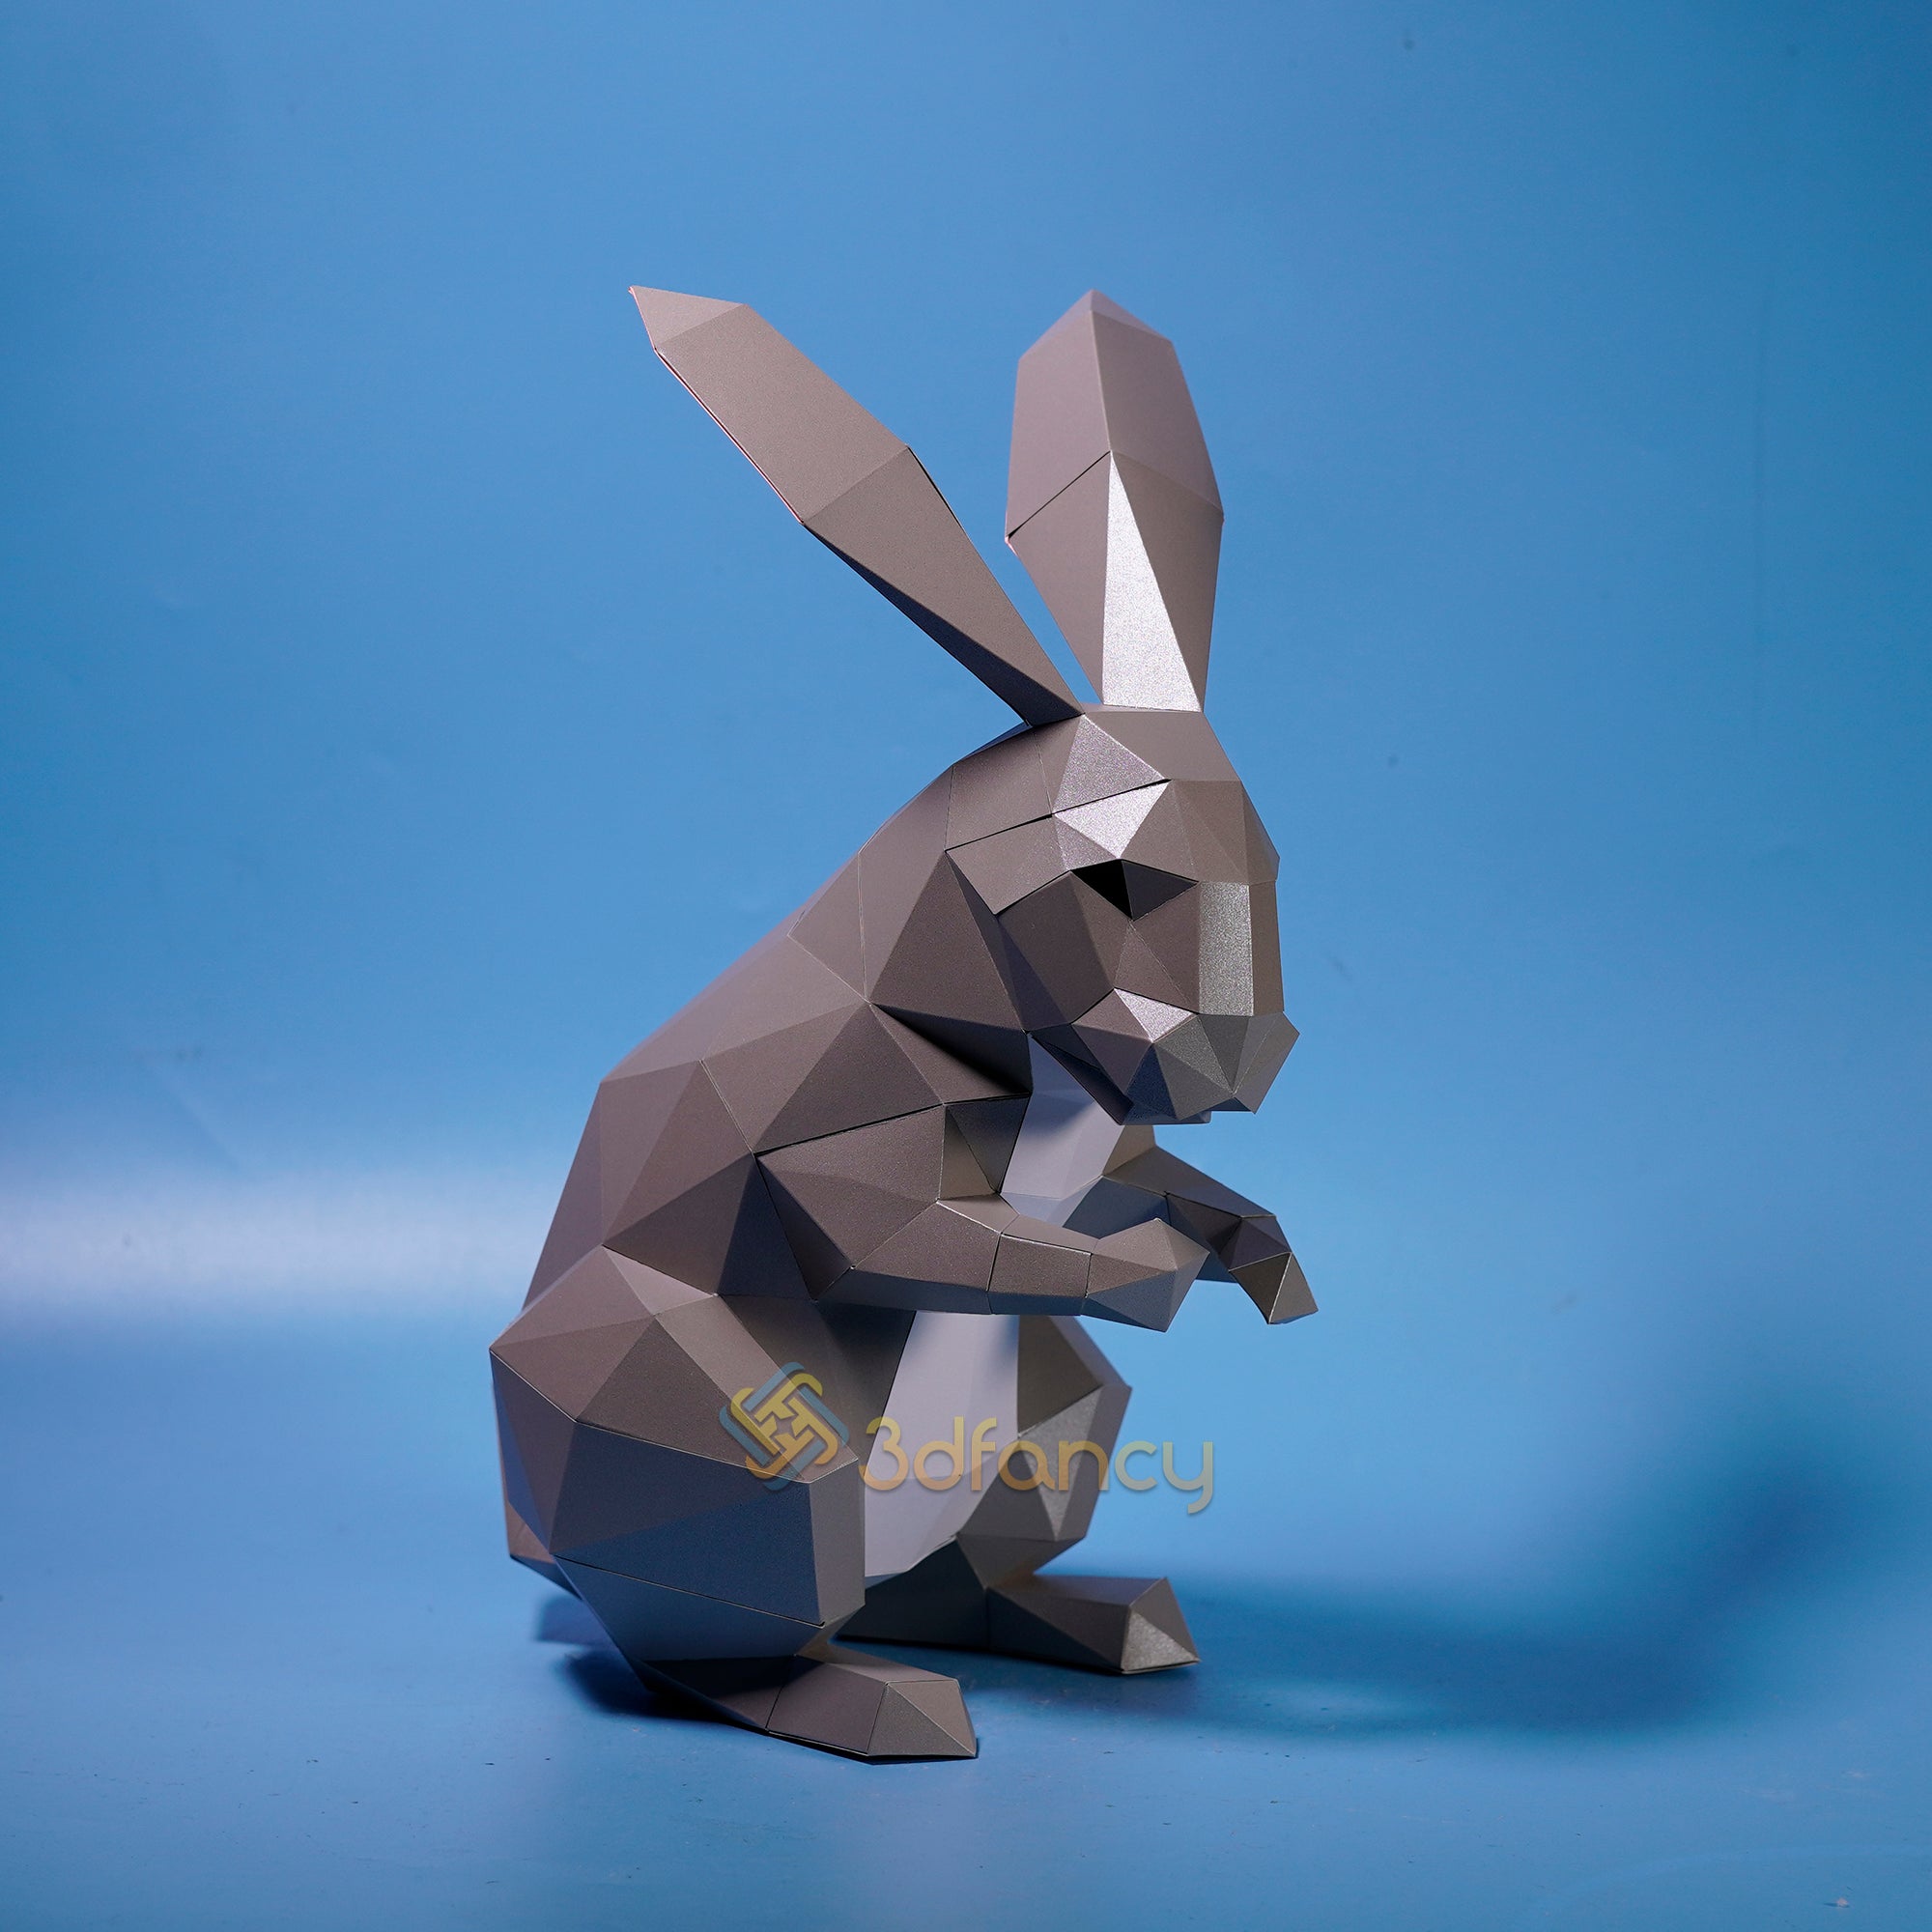 Rabbit Standing 3D Papercraft PDF, SVG Template For DIY Bunny Rabbit For Easter Decor, Rabbit Origami, Low Poly, Sculpture, Bunny Model